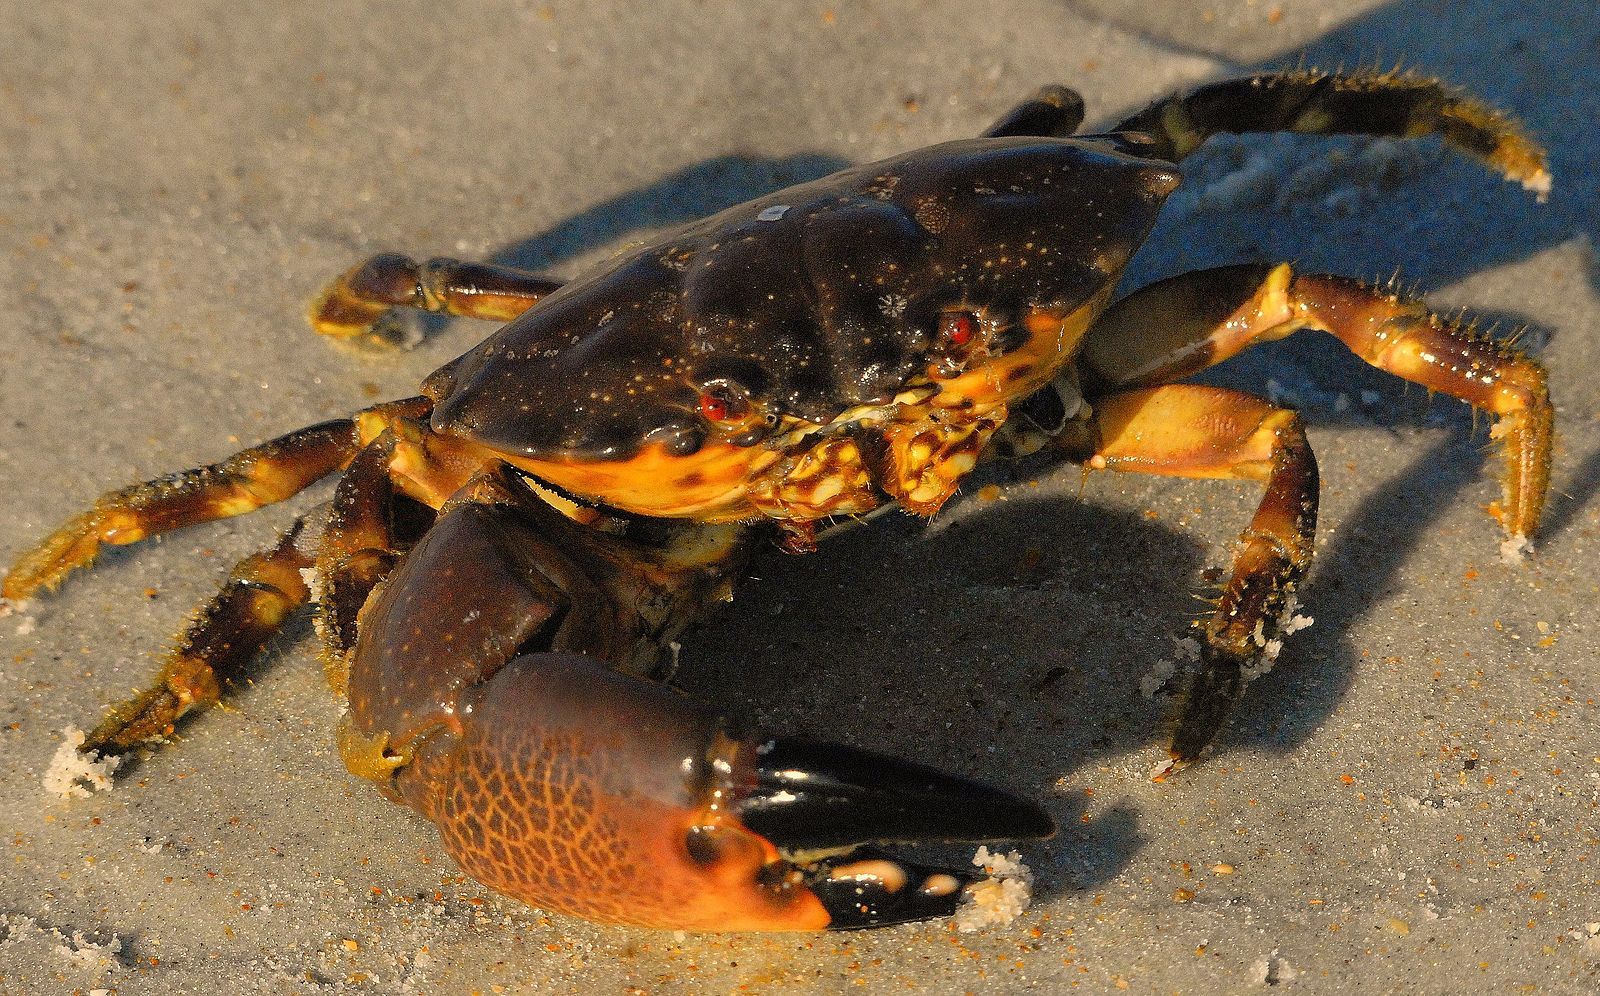 Juvenile Stone Crab by Andrea Westmoreland, Wikimedia Commons